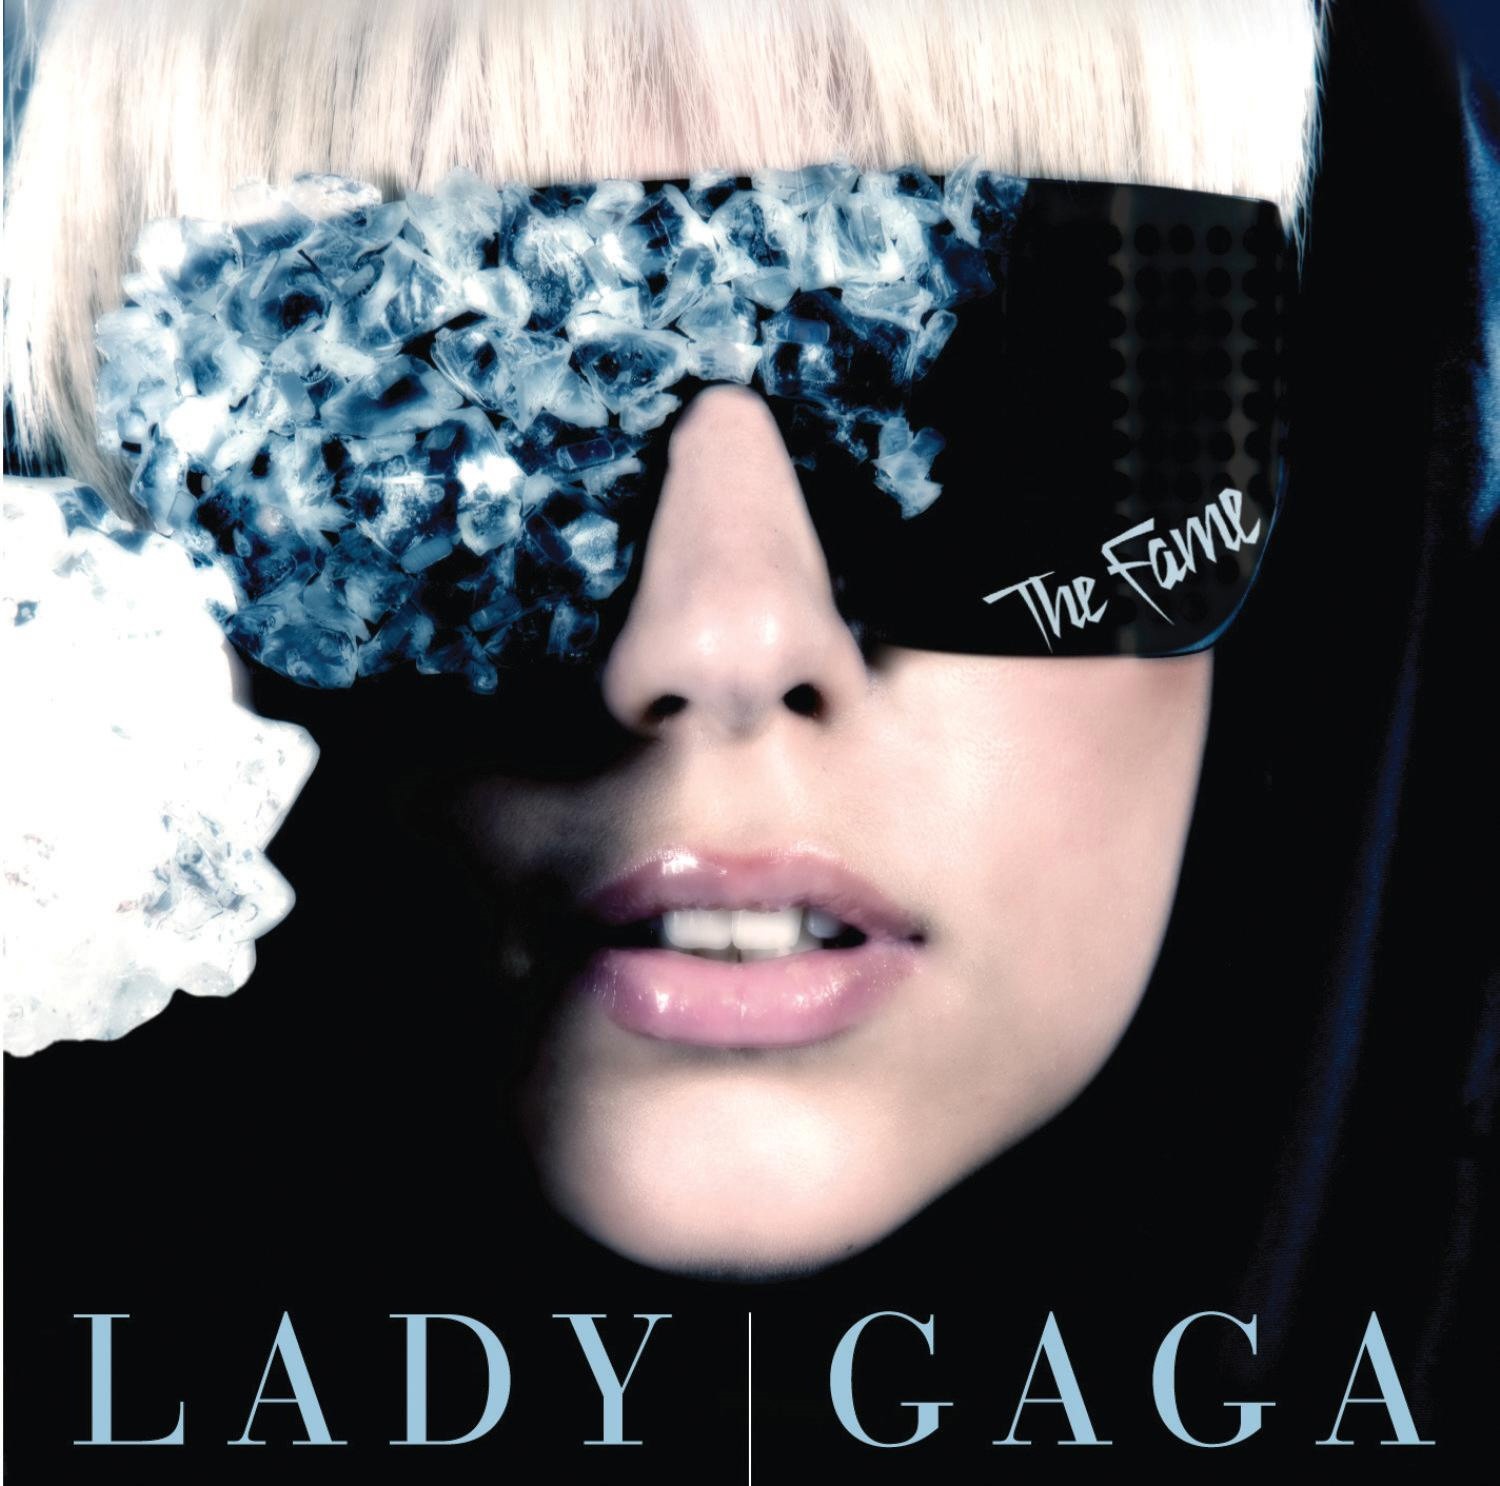 Assortment of Lady Gaga covers